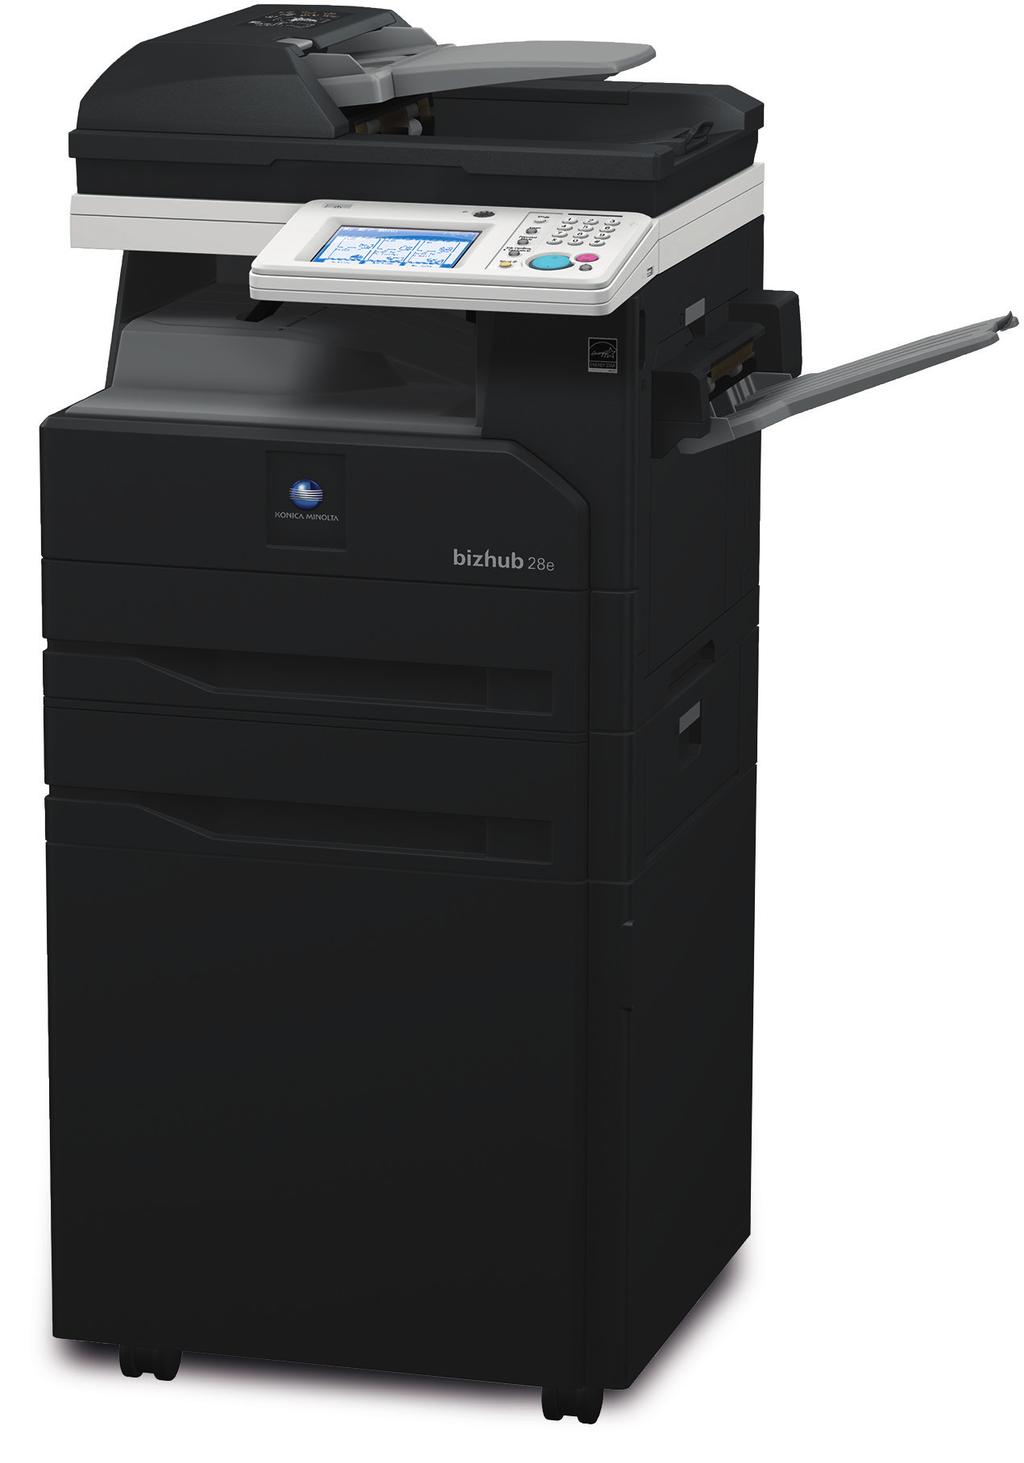 How to Build a System (from start to finish) Step 1: Base Unit Printer/Copier/Scanner/Fax Includes GDI, PCL 5e/XL, 5.